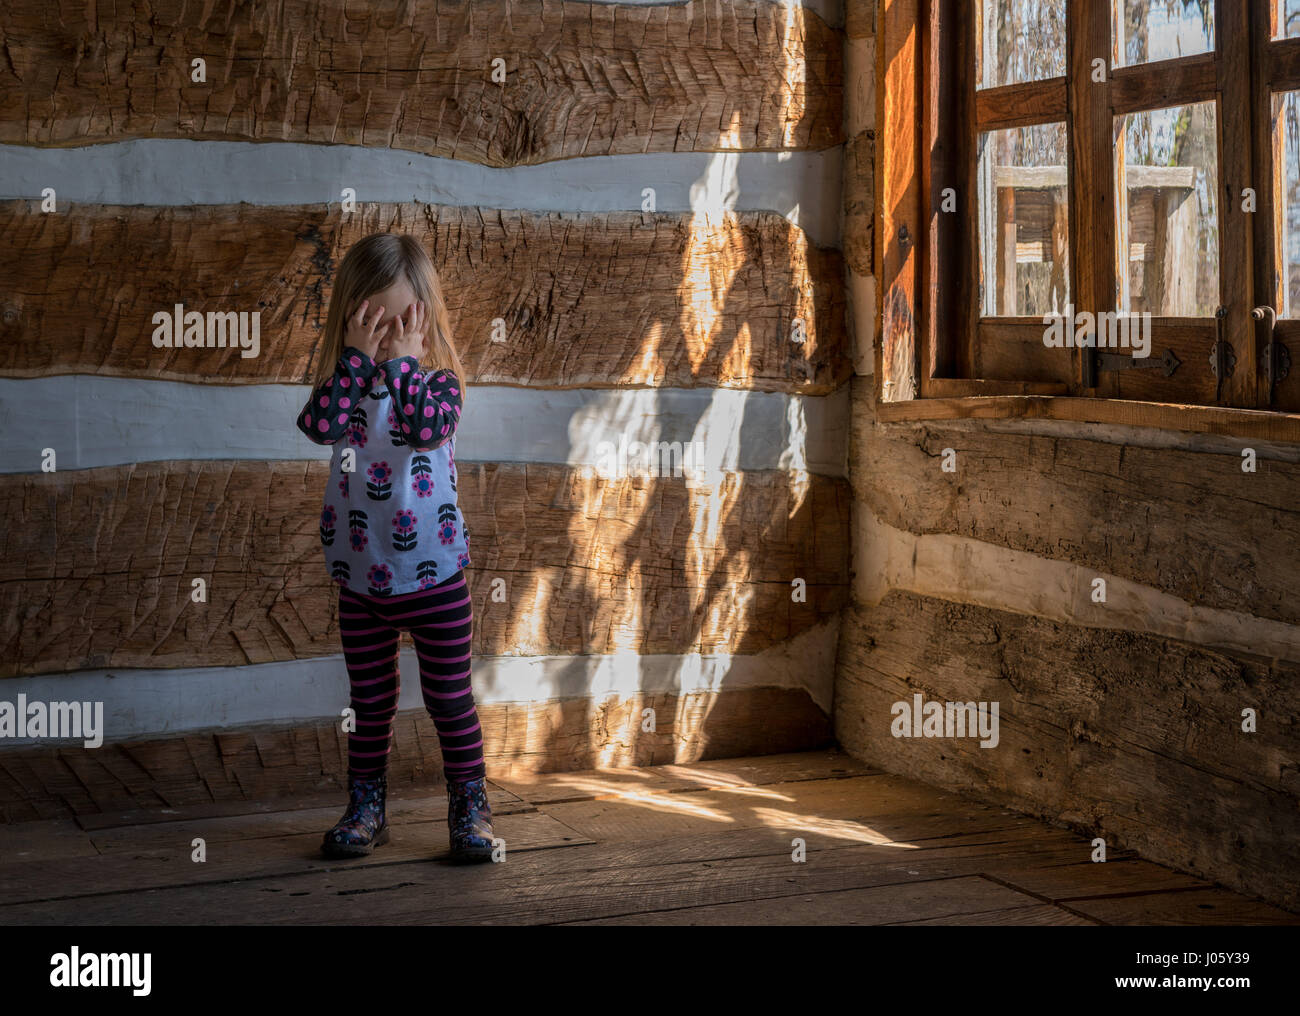 Lonely small baby girl in empty cabin Stock Photo